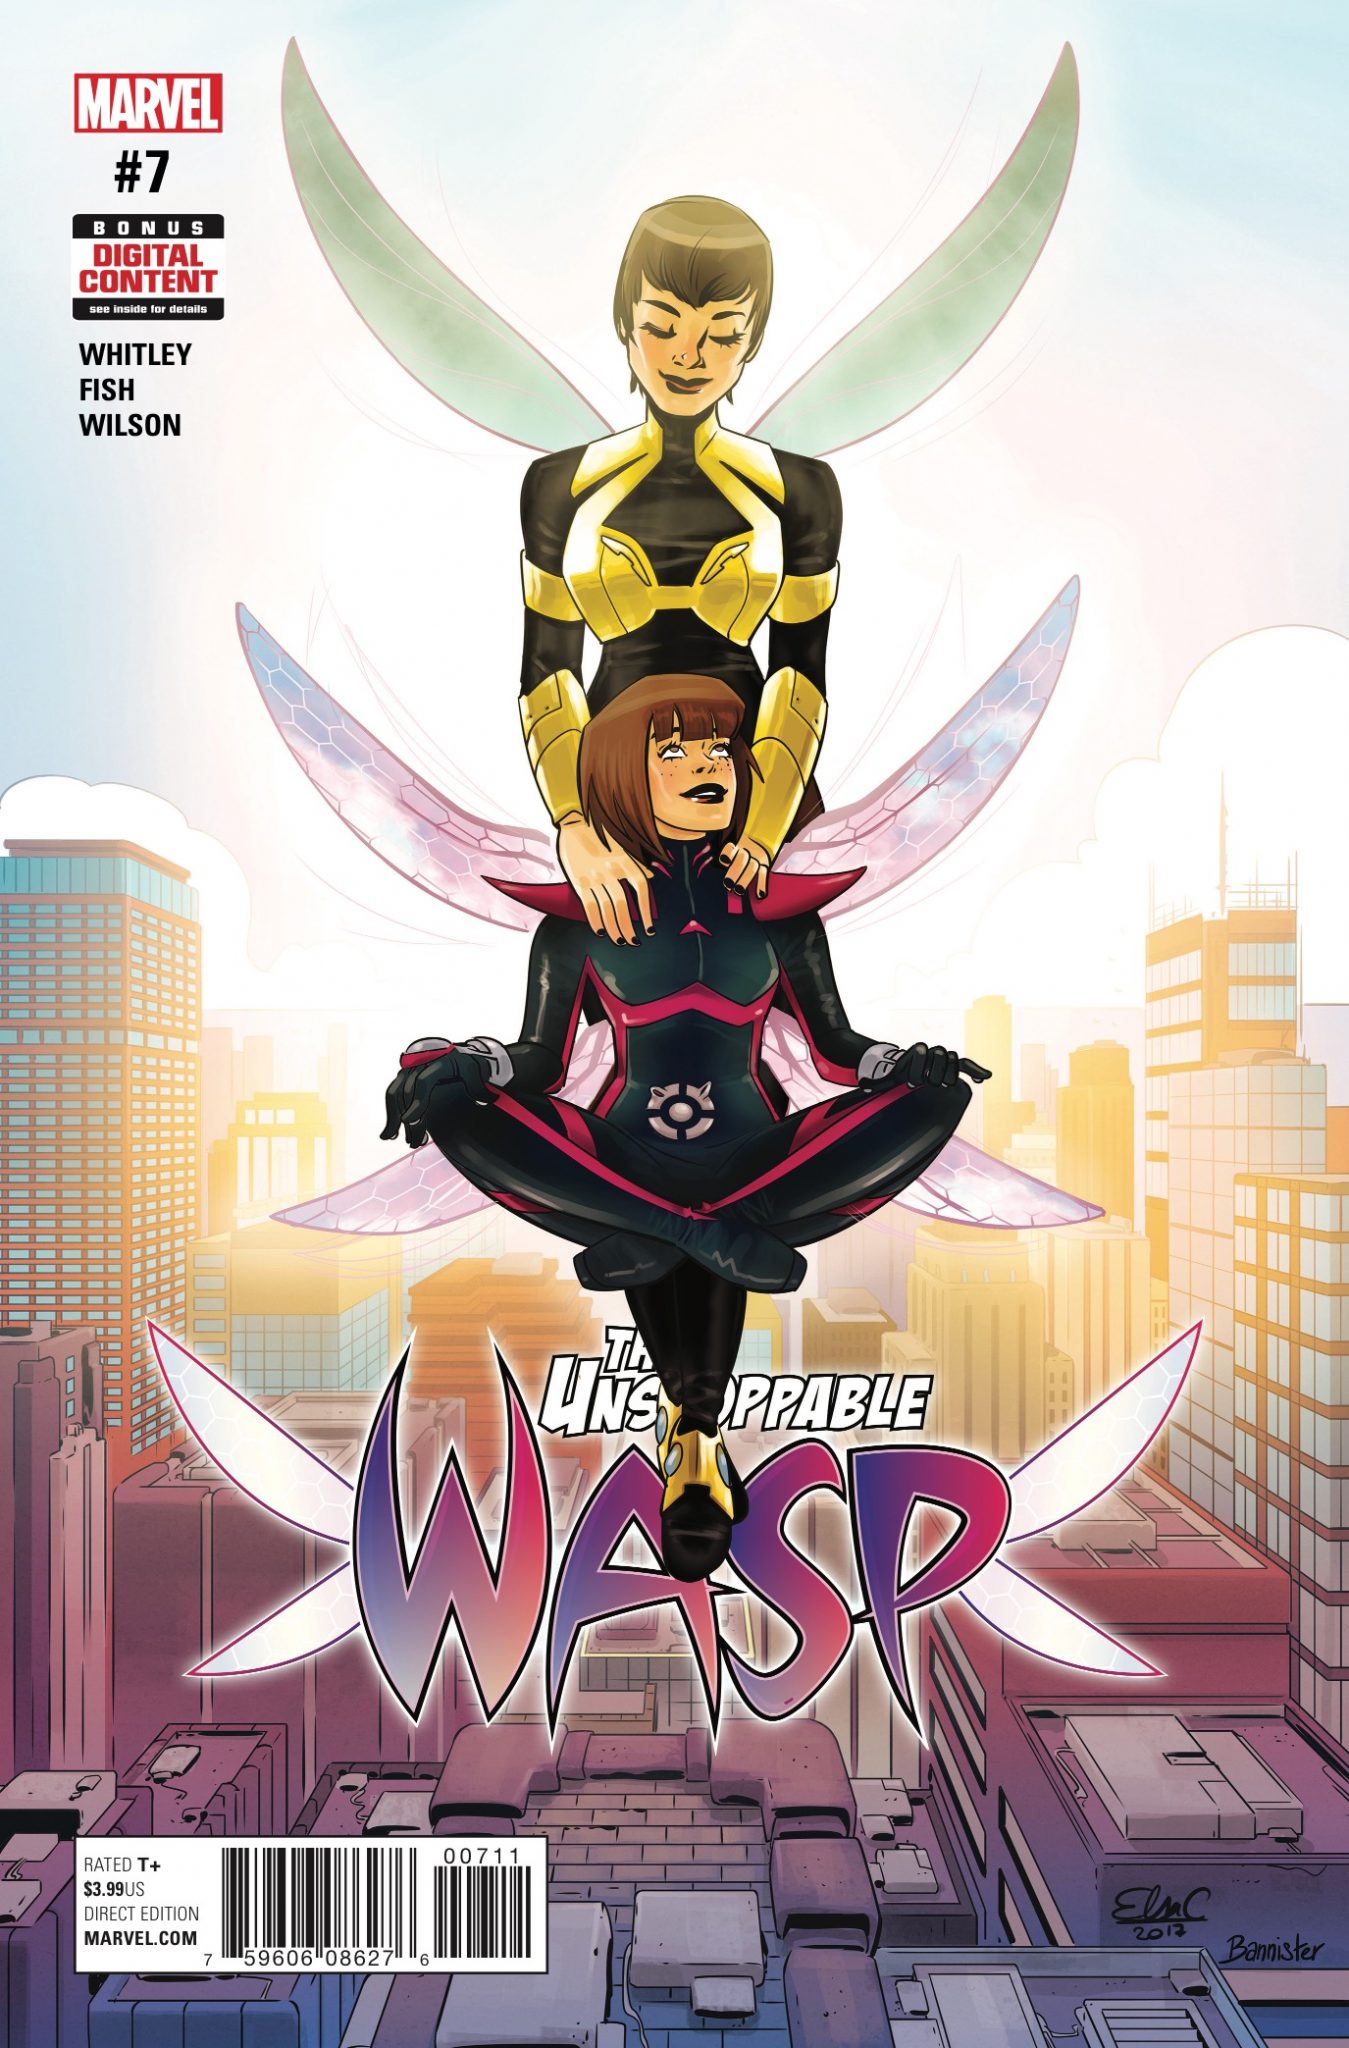 The Unstoppable Wasp #7 Review